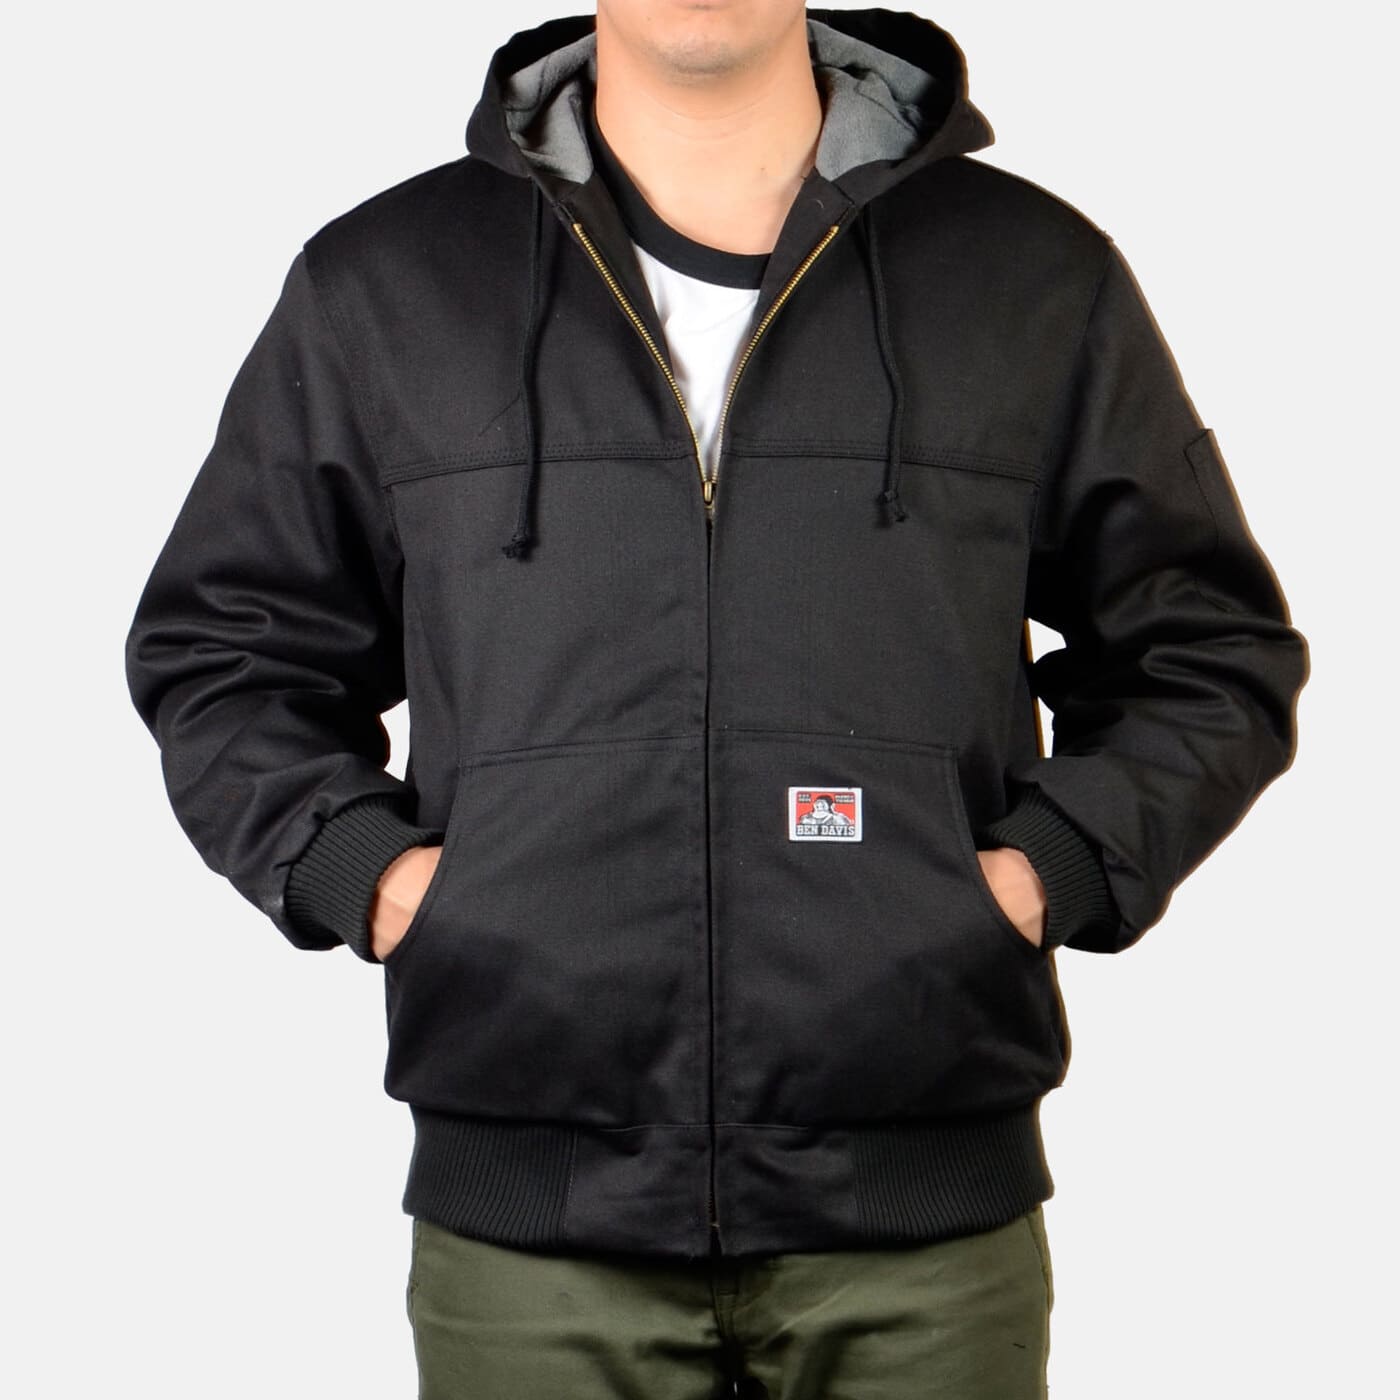 Hooded Zippered Front Jacket